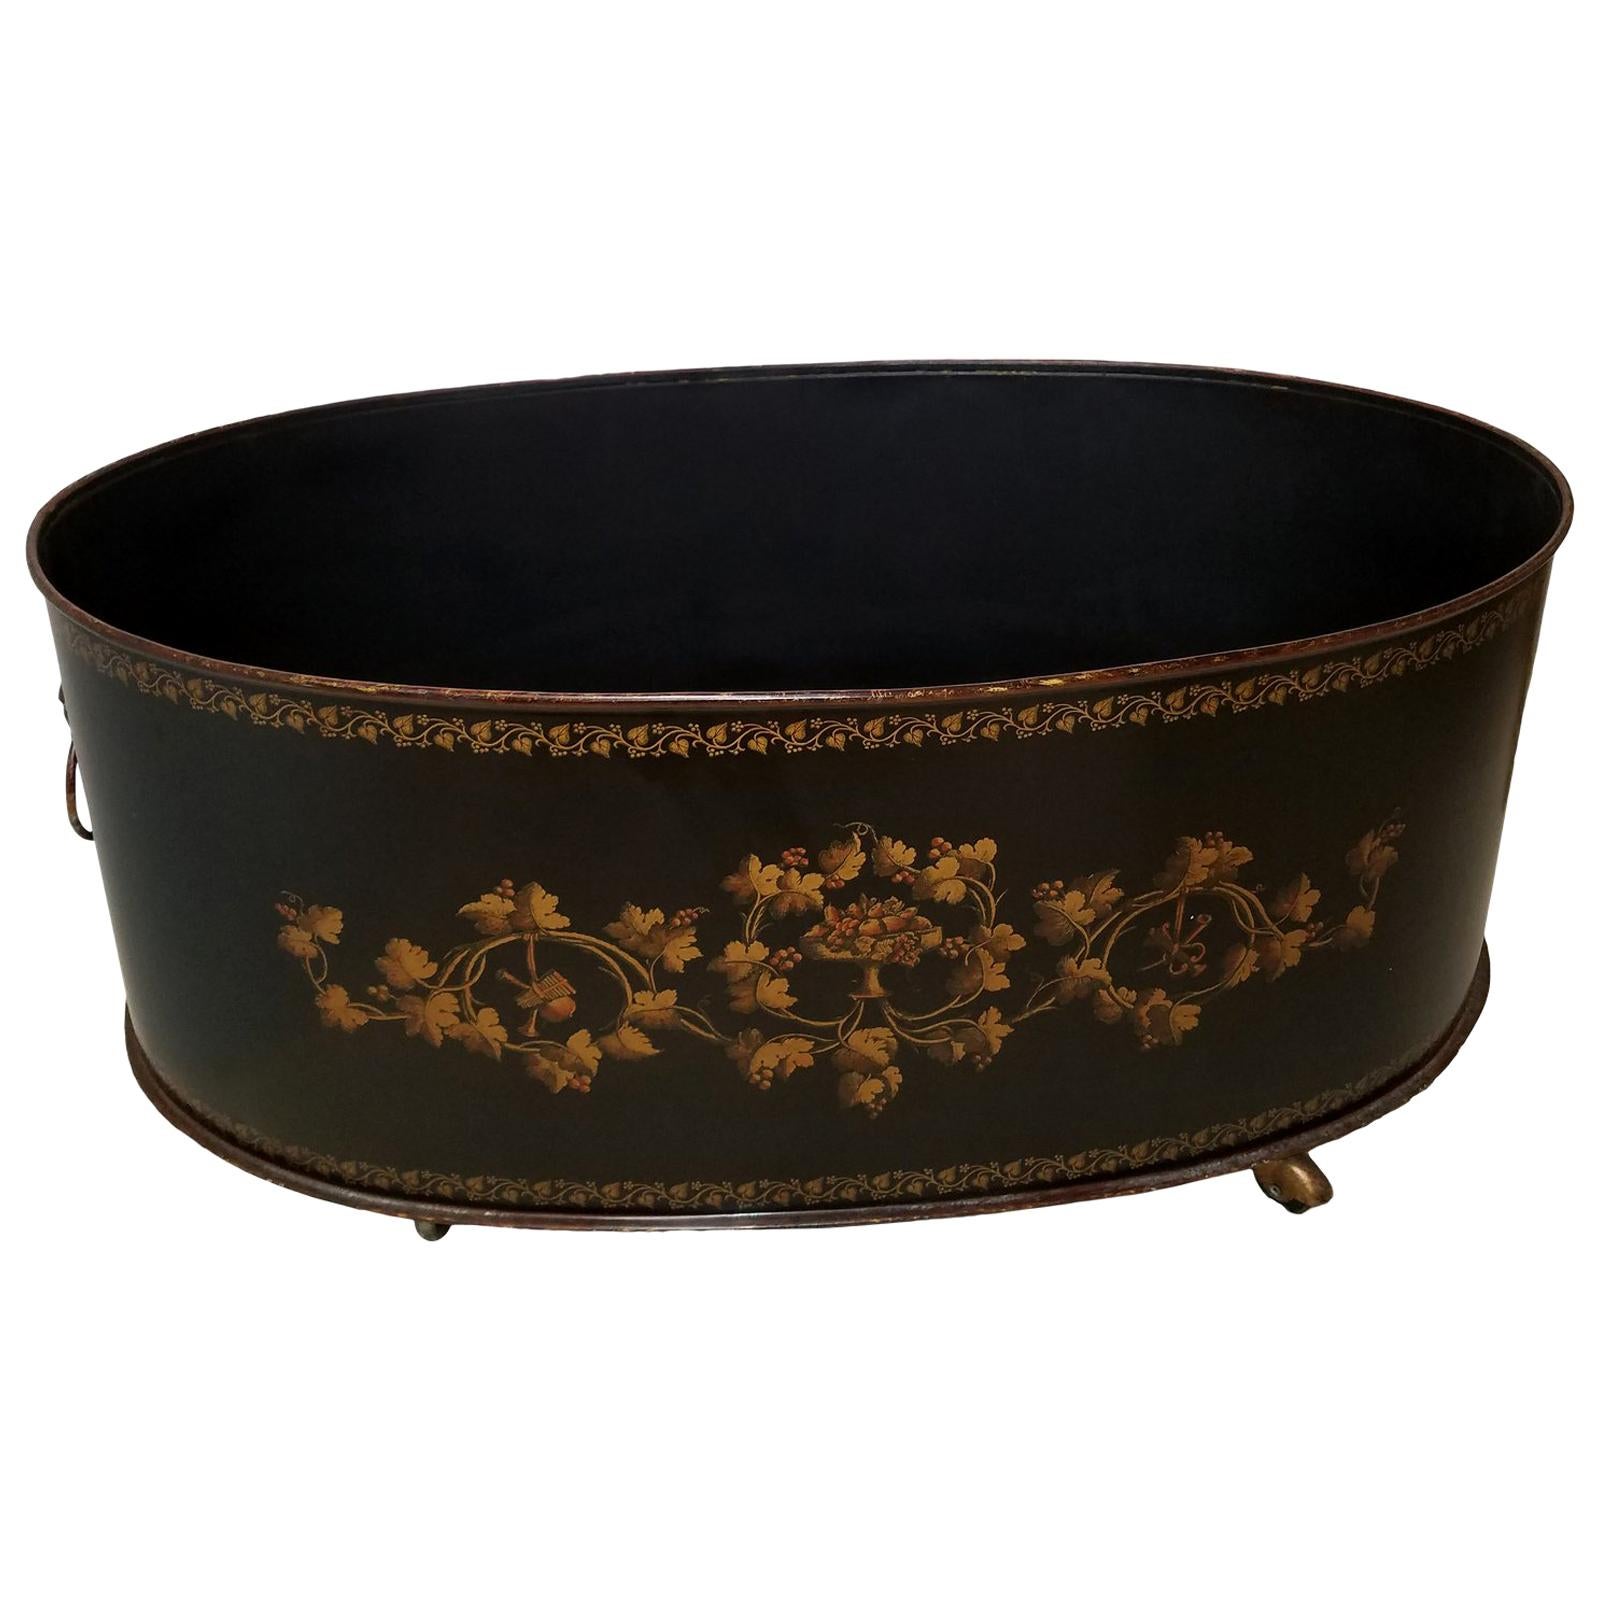 Grand Scale English Regency Oval Tole Planter with Lion Ring Handles on Castors